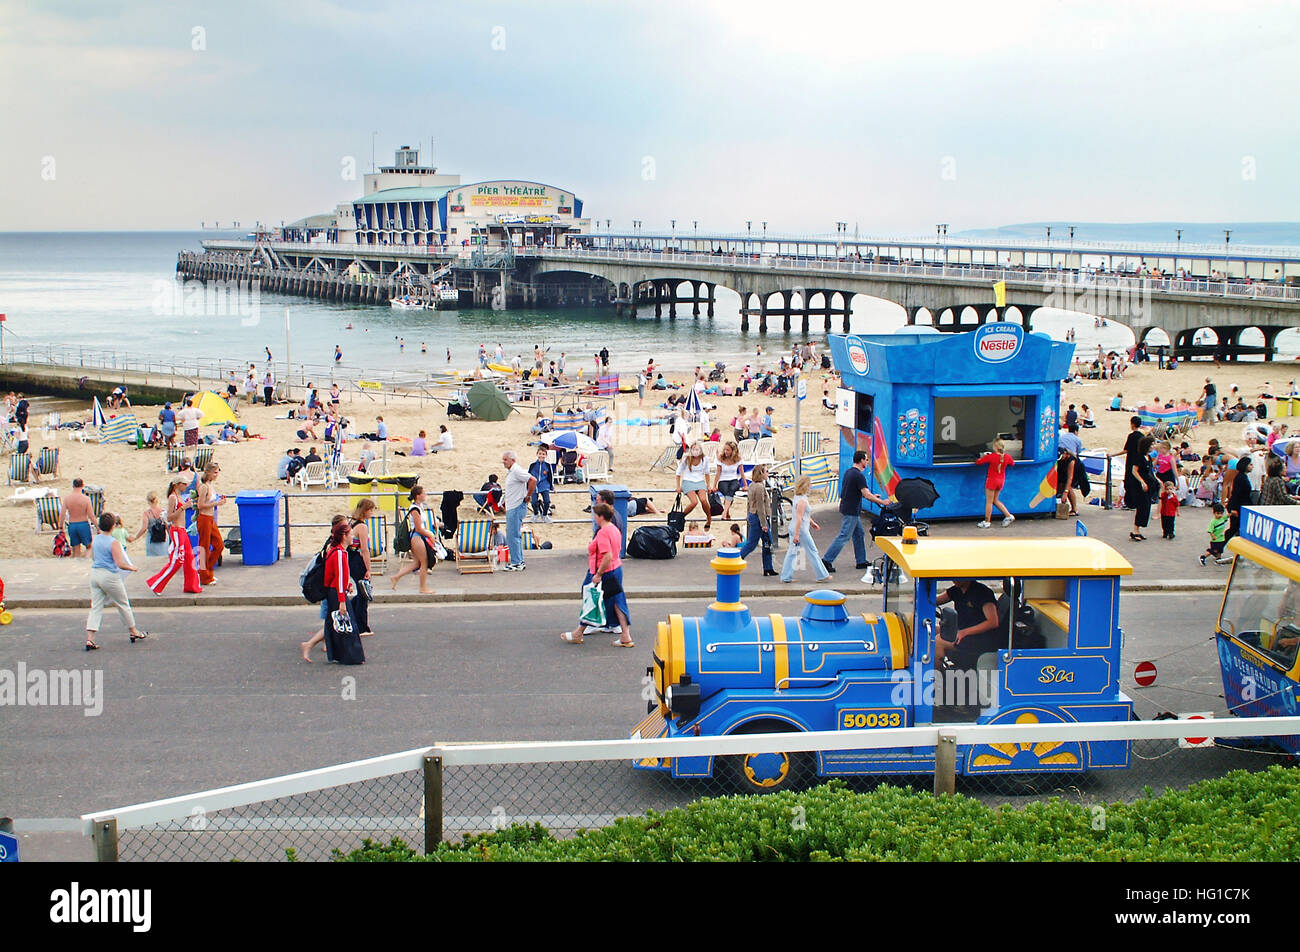 Bournemouth's promenade land train, seafront, and pier in the background. Stock Photo